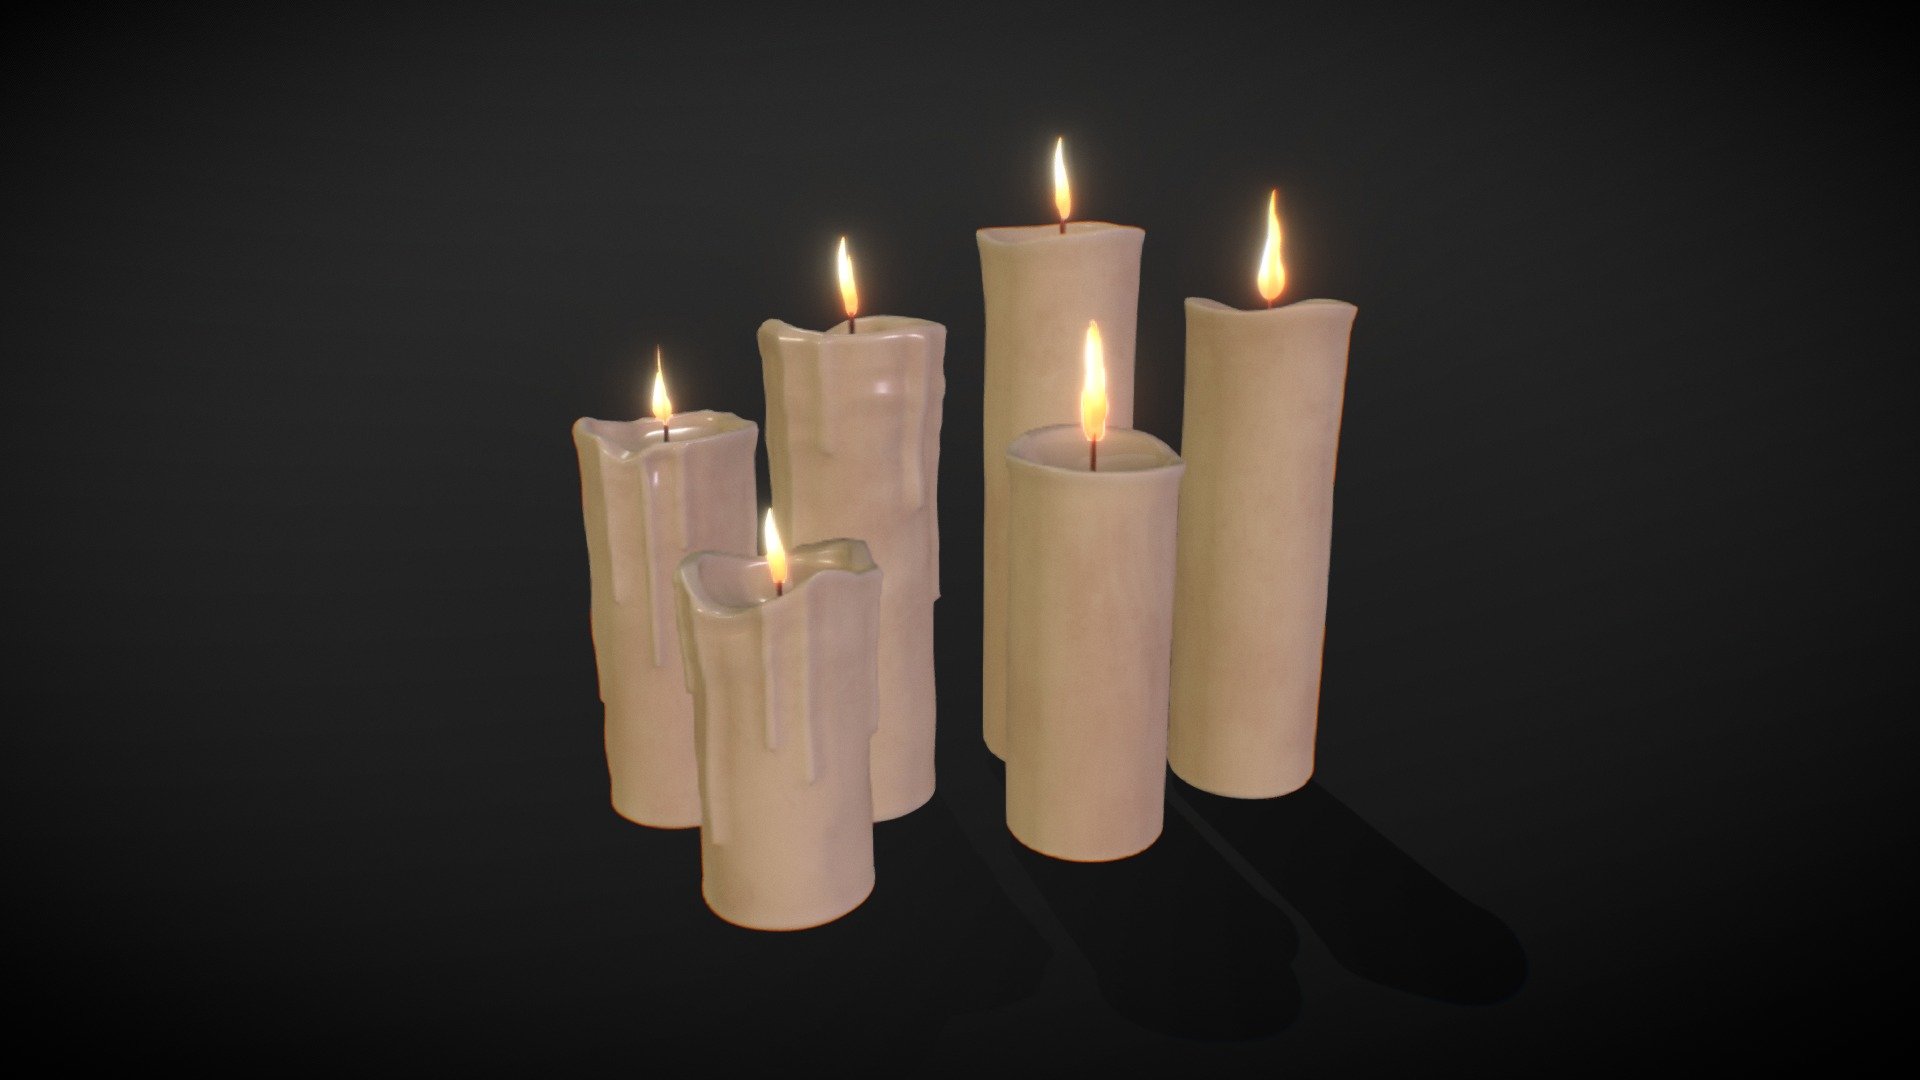 Candles asset pack at varying stages of melting. (Not animated)

1024x1024 to 2048x2048 textures. 

Created using Maya and Substance Painter 3d model